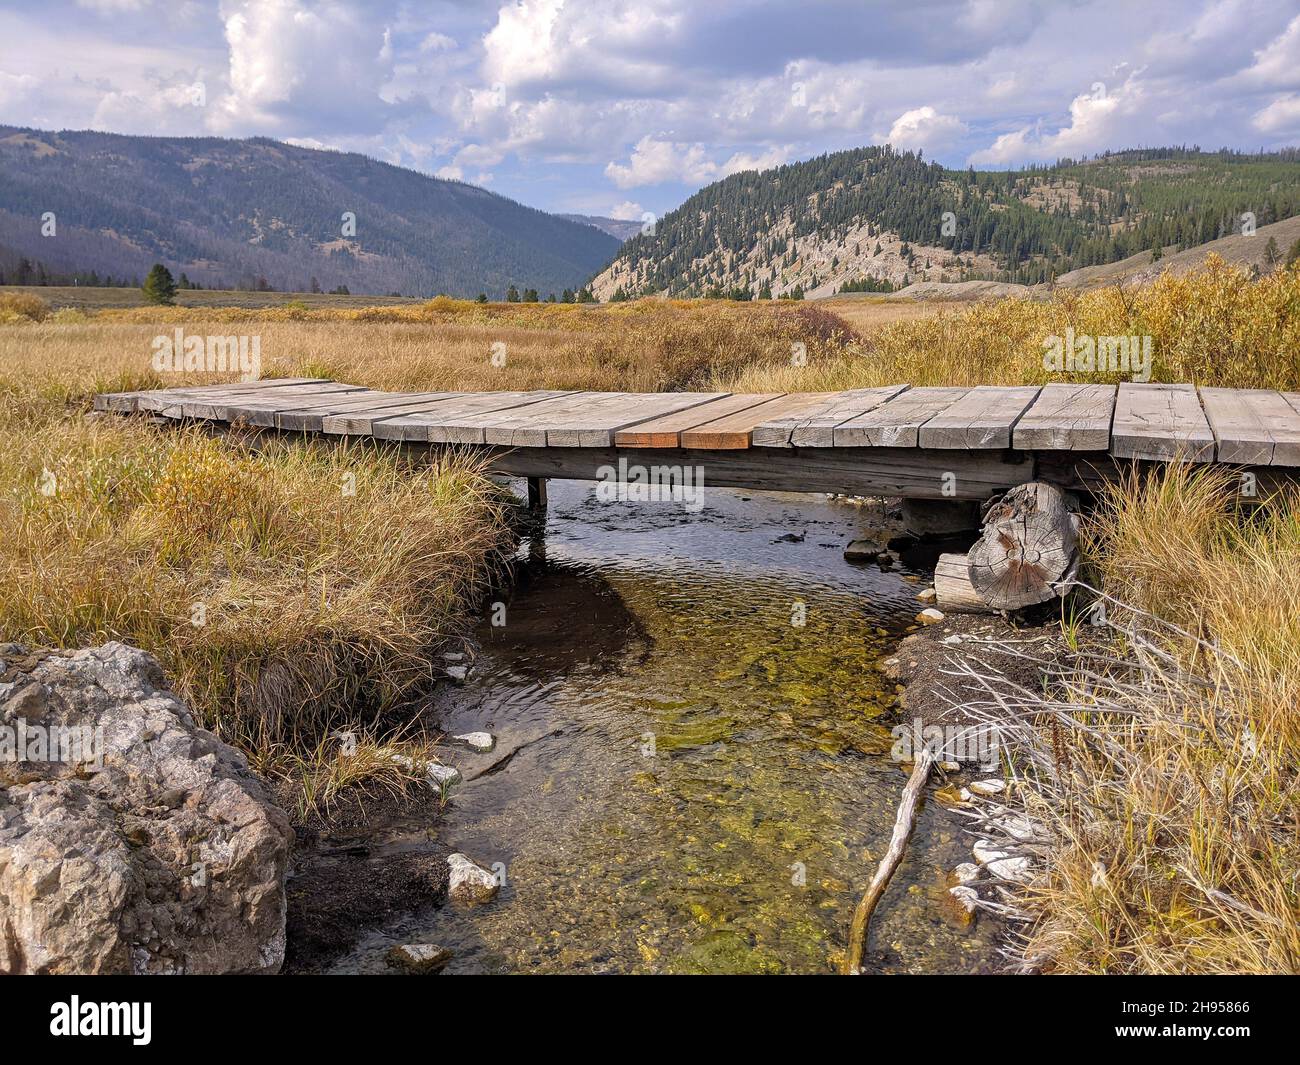 A wooden footbridge spans the banks of a creek in a wide, grassy mountain valley Stock Photo